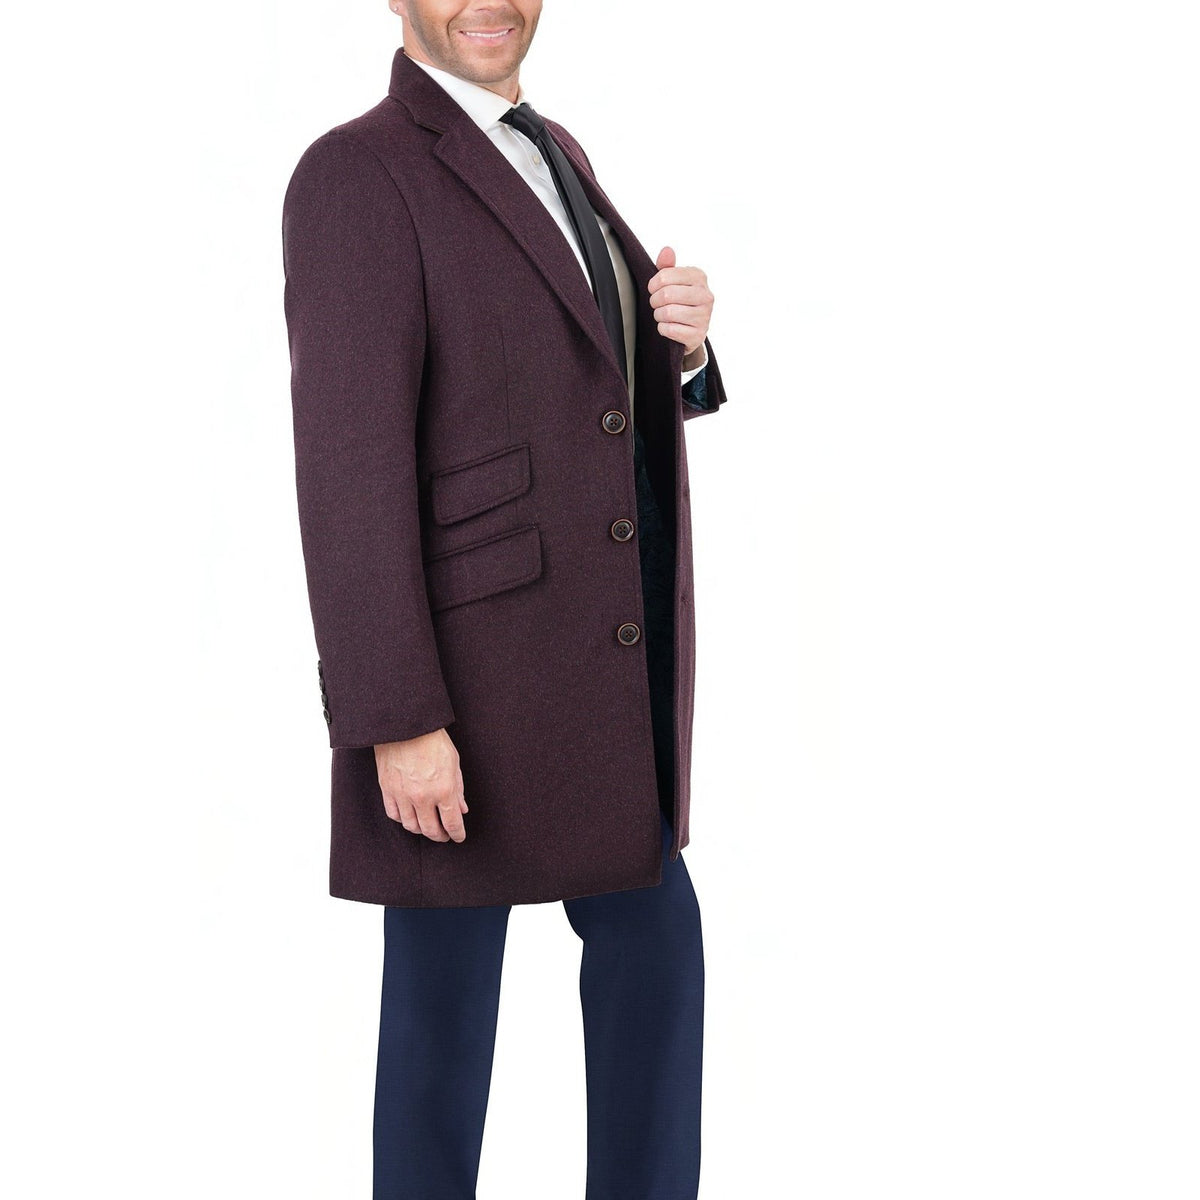 Arthur Black OUTERWEAR The Suit Depot Men&#39;s Wool Cashmere Single Breasted Burgundy 3/4 Length Top Coat